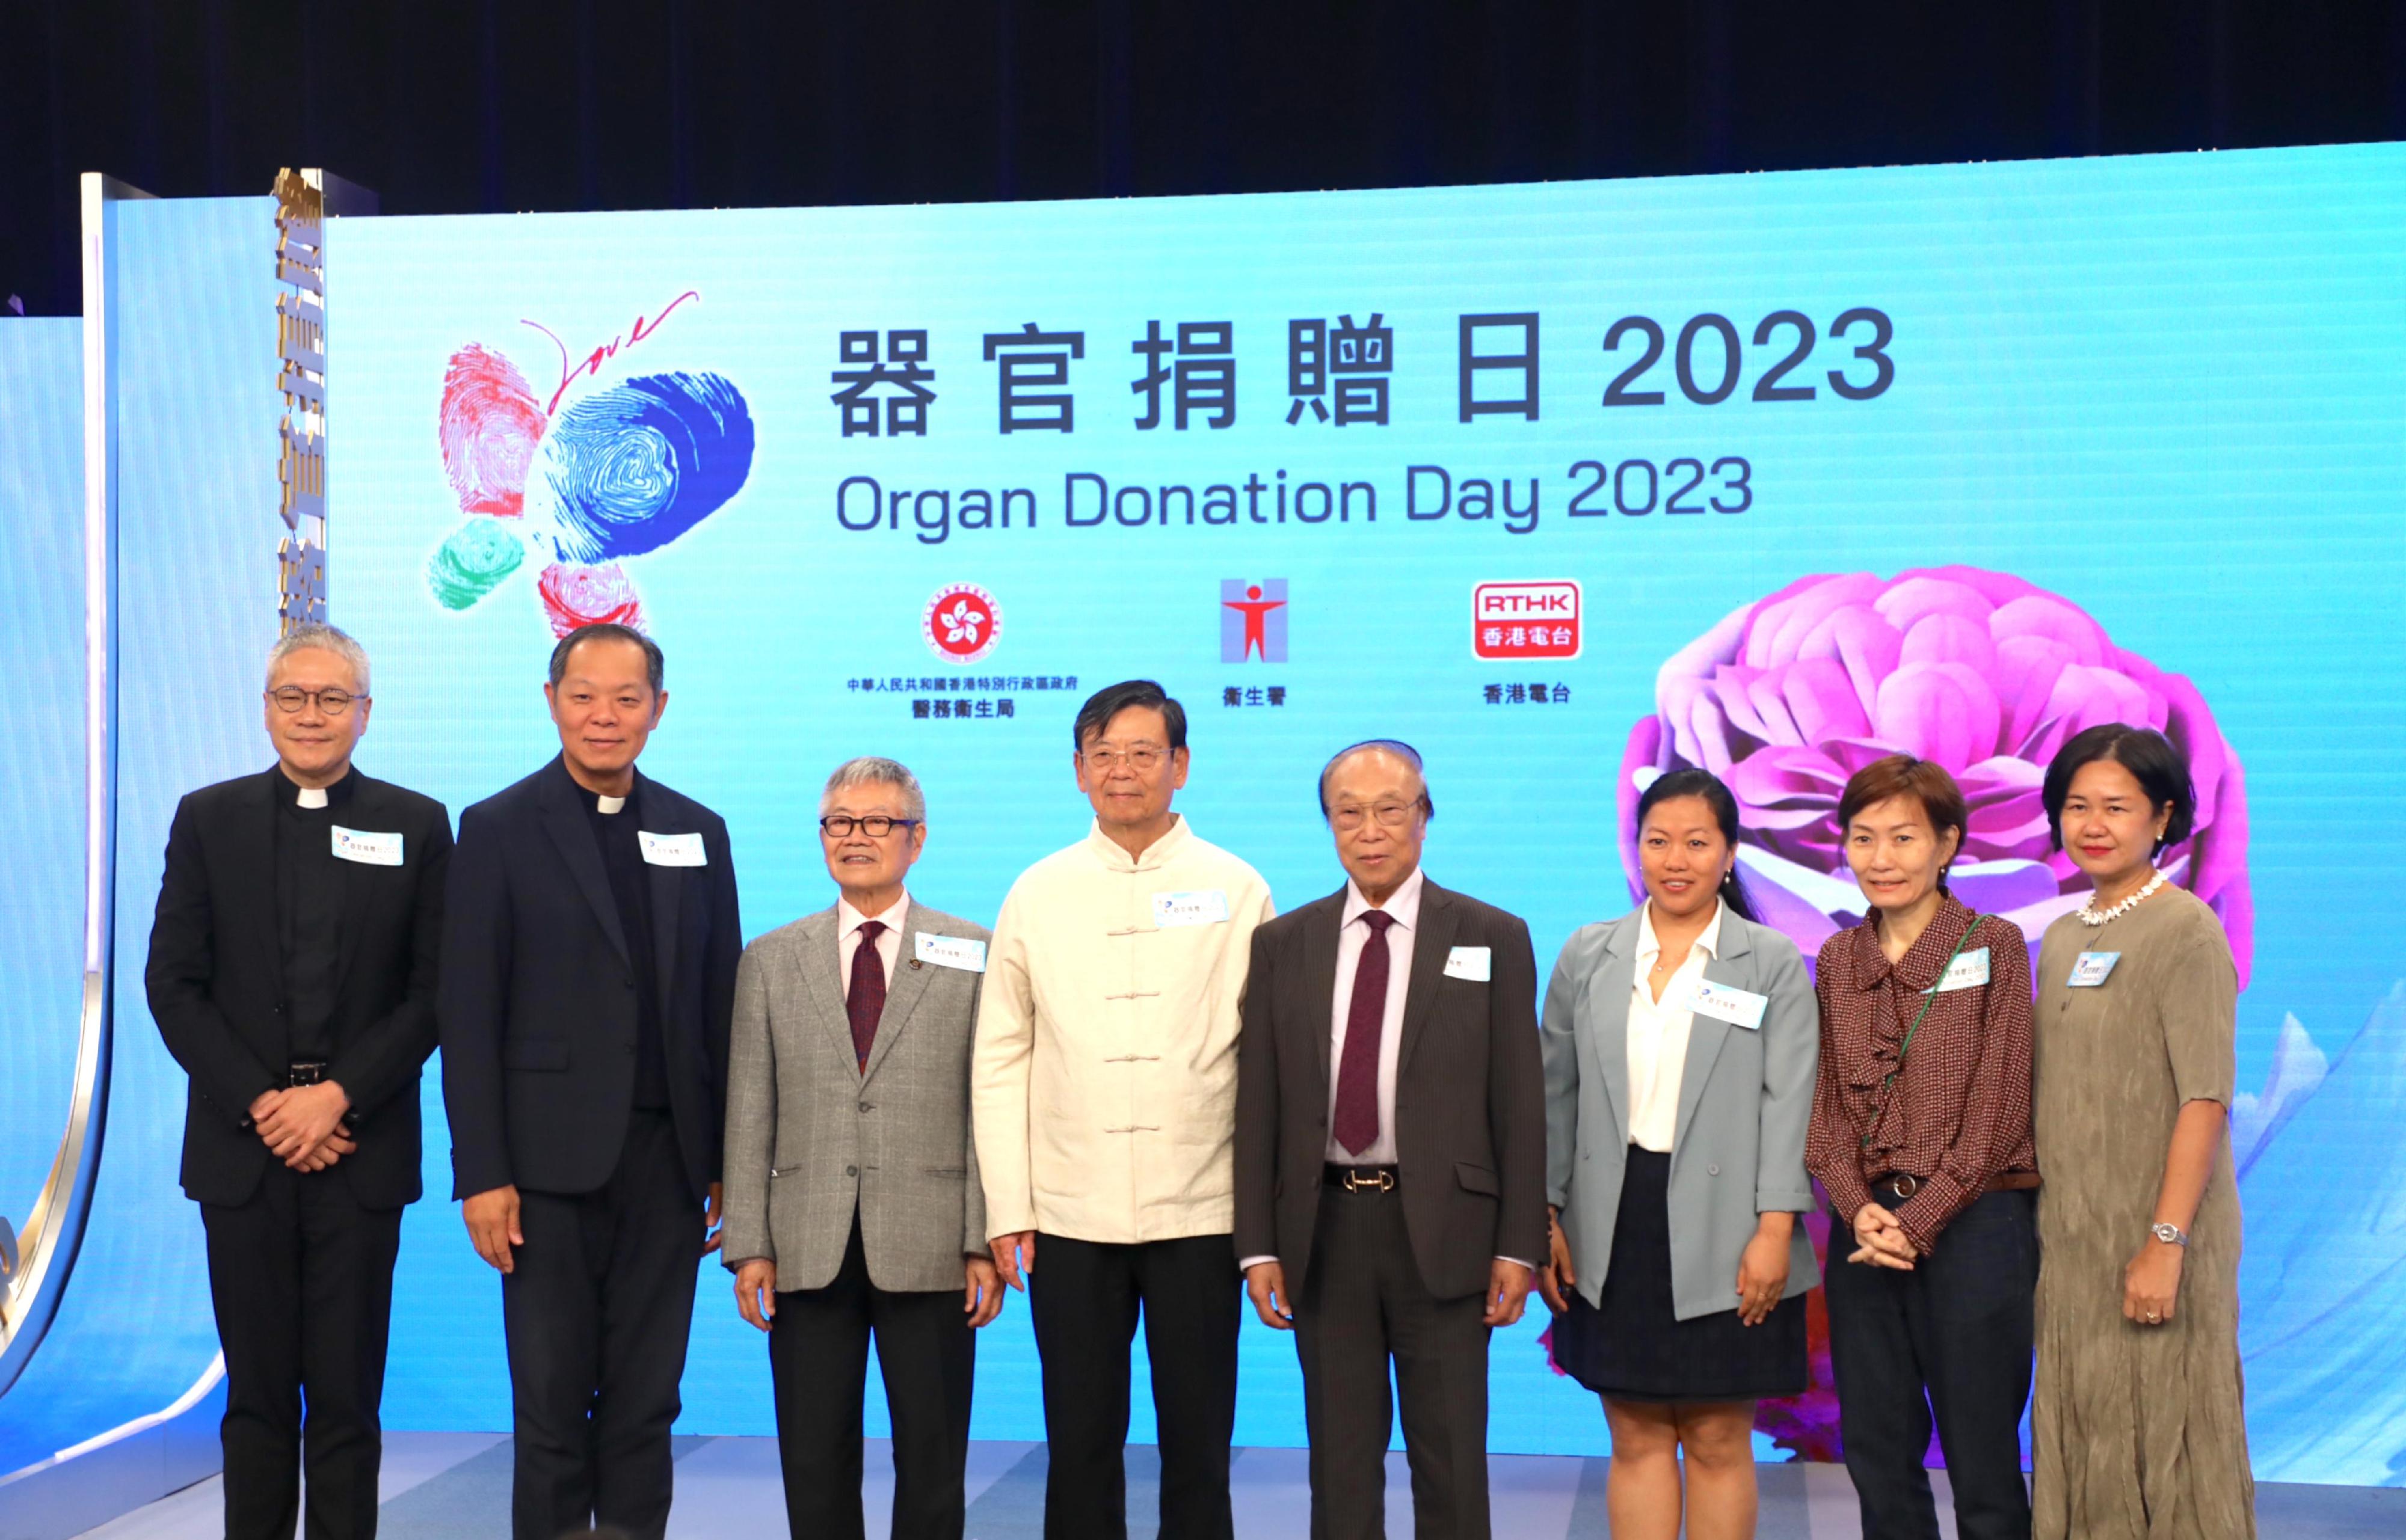 The representatives from five religious groups and ethnic minorities are invited to the celebration of Organ Donation Day 2023 today (November 11) to show the support of different religions and ethnic minorities for organ donation.